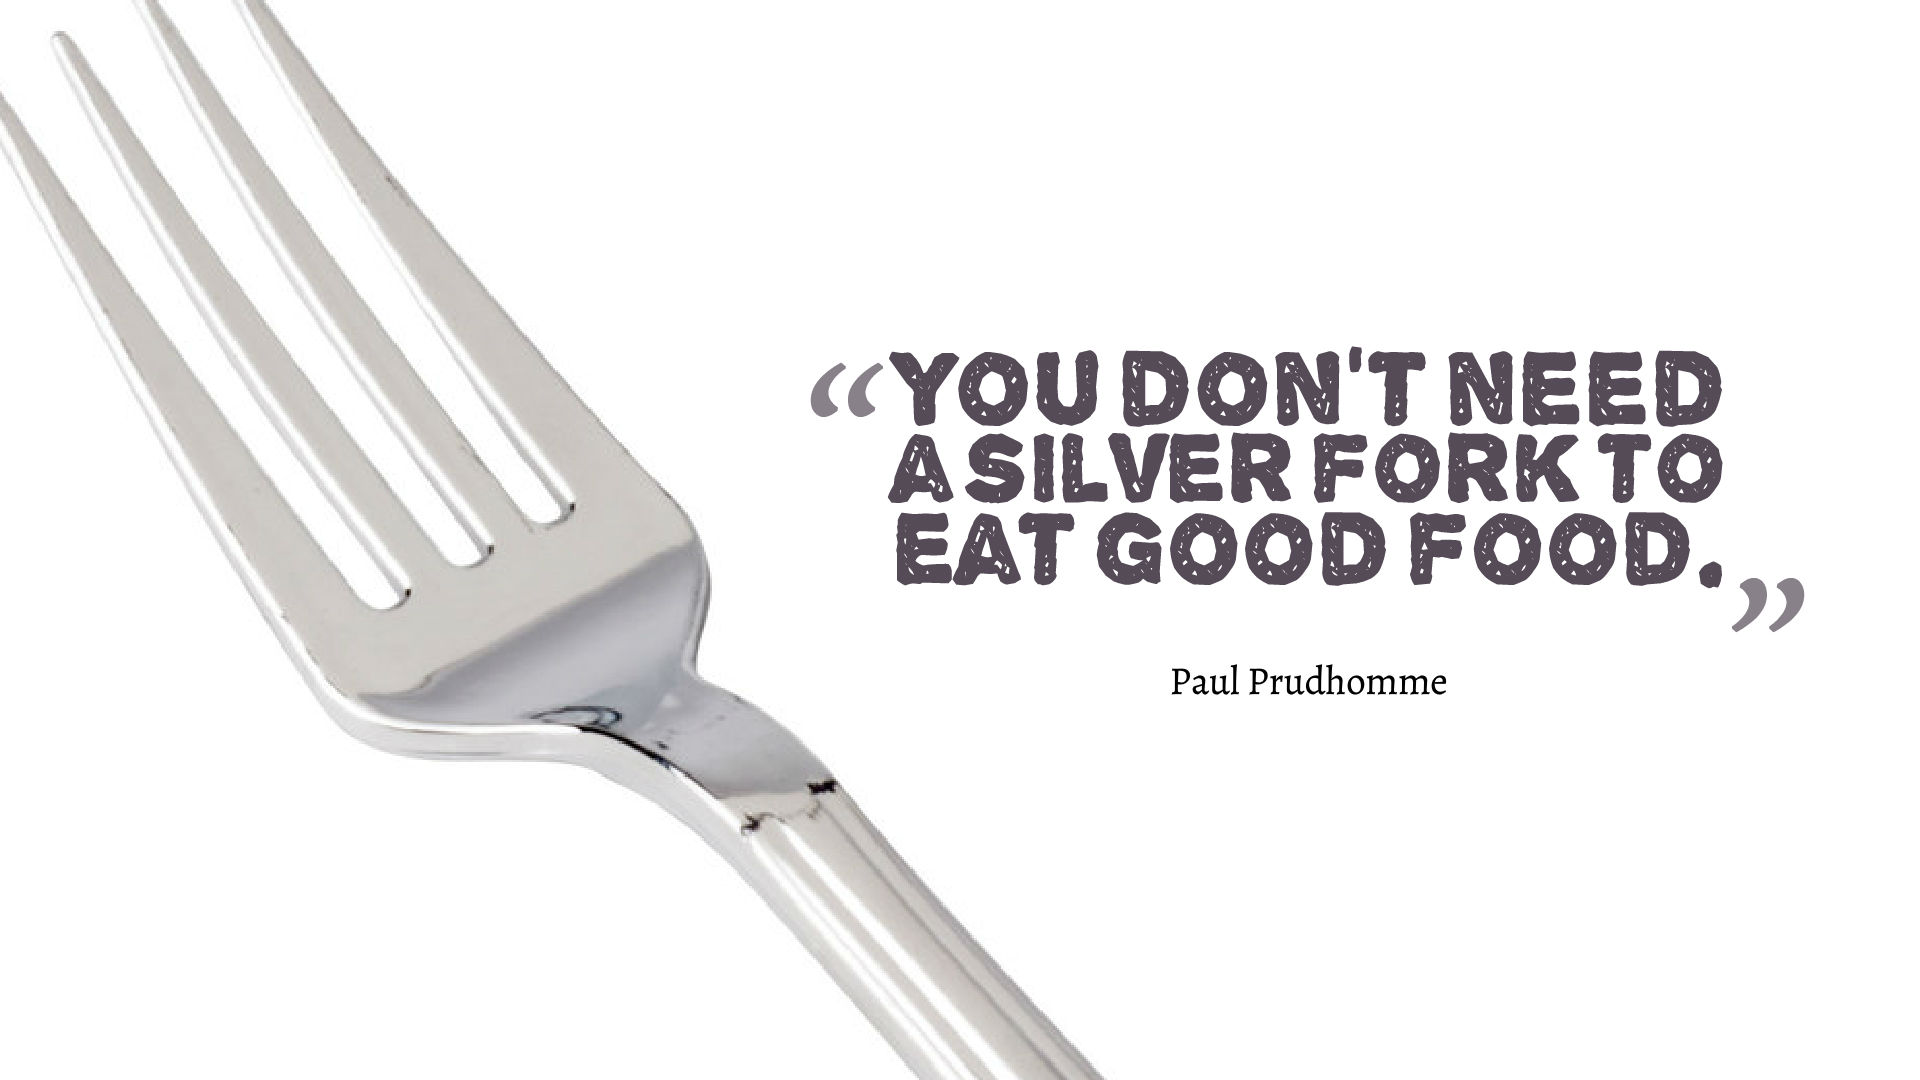 40 405830 Food Quotes Desktop   Food Quotes Wall Paper 